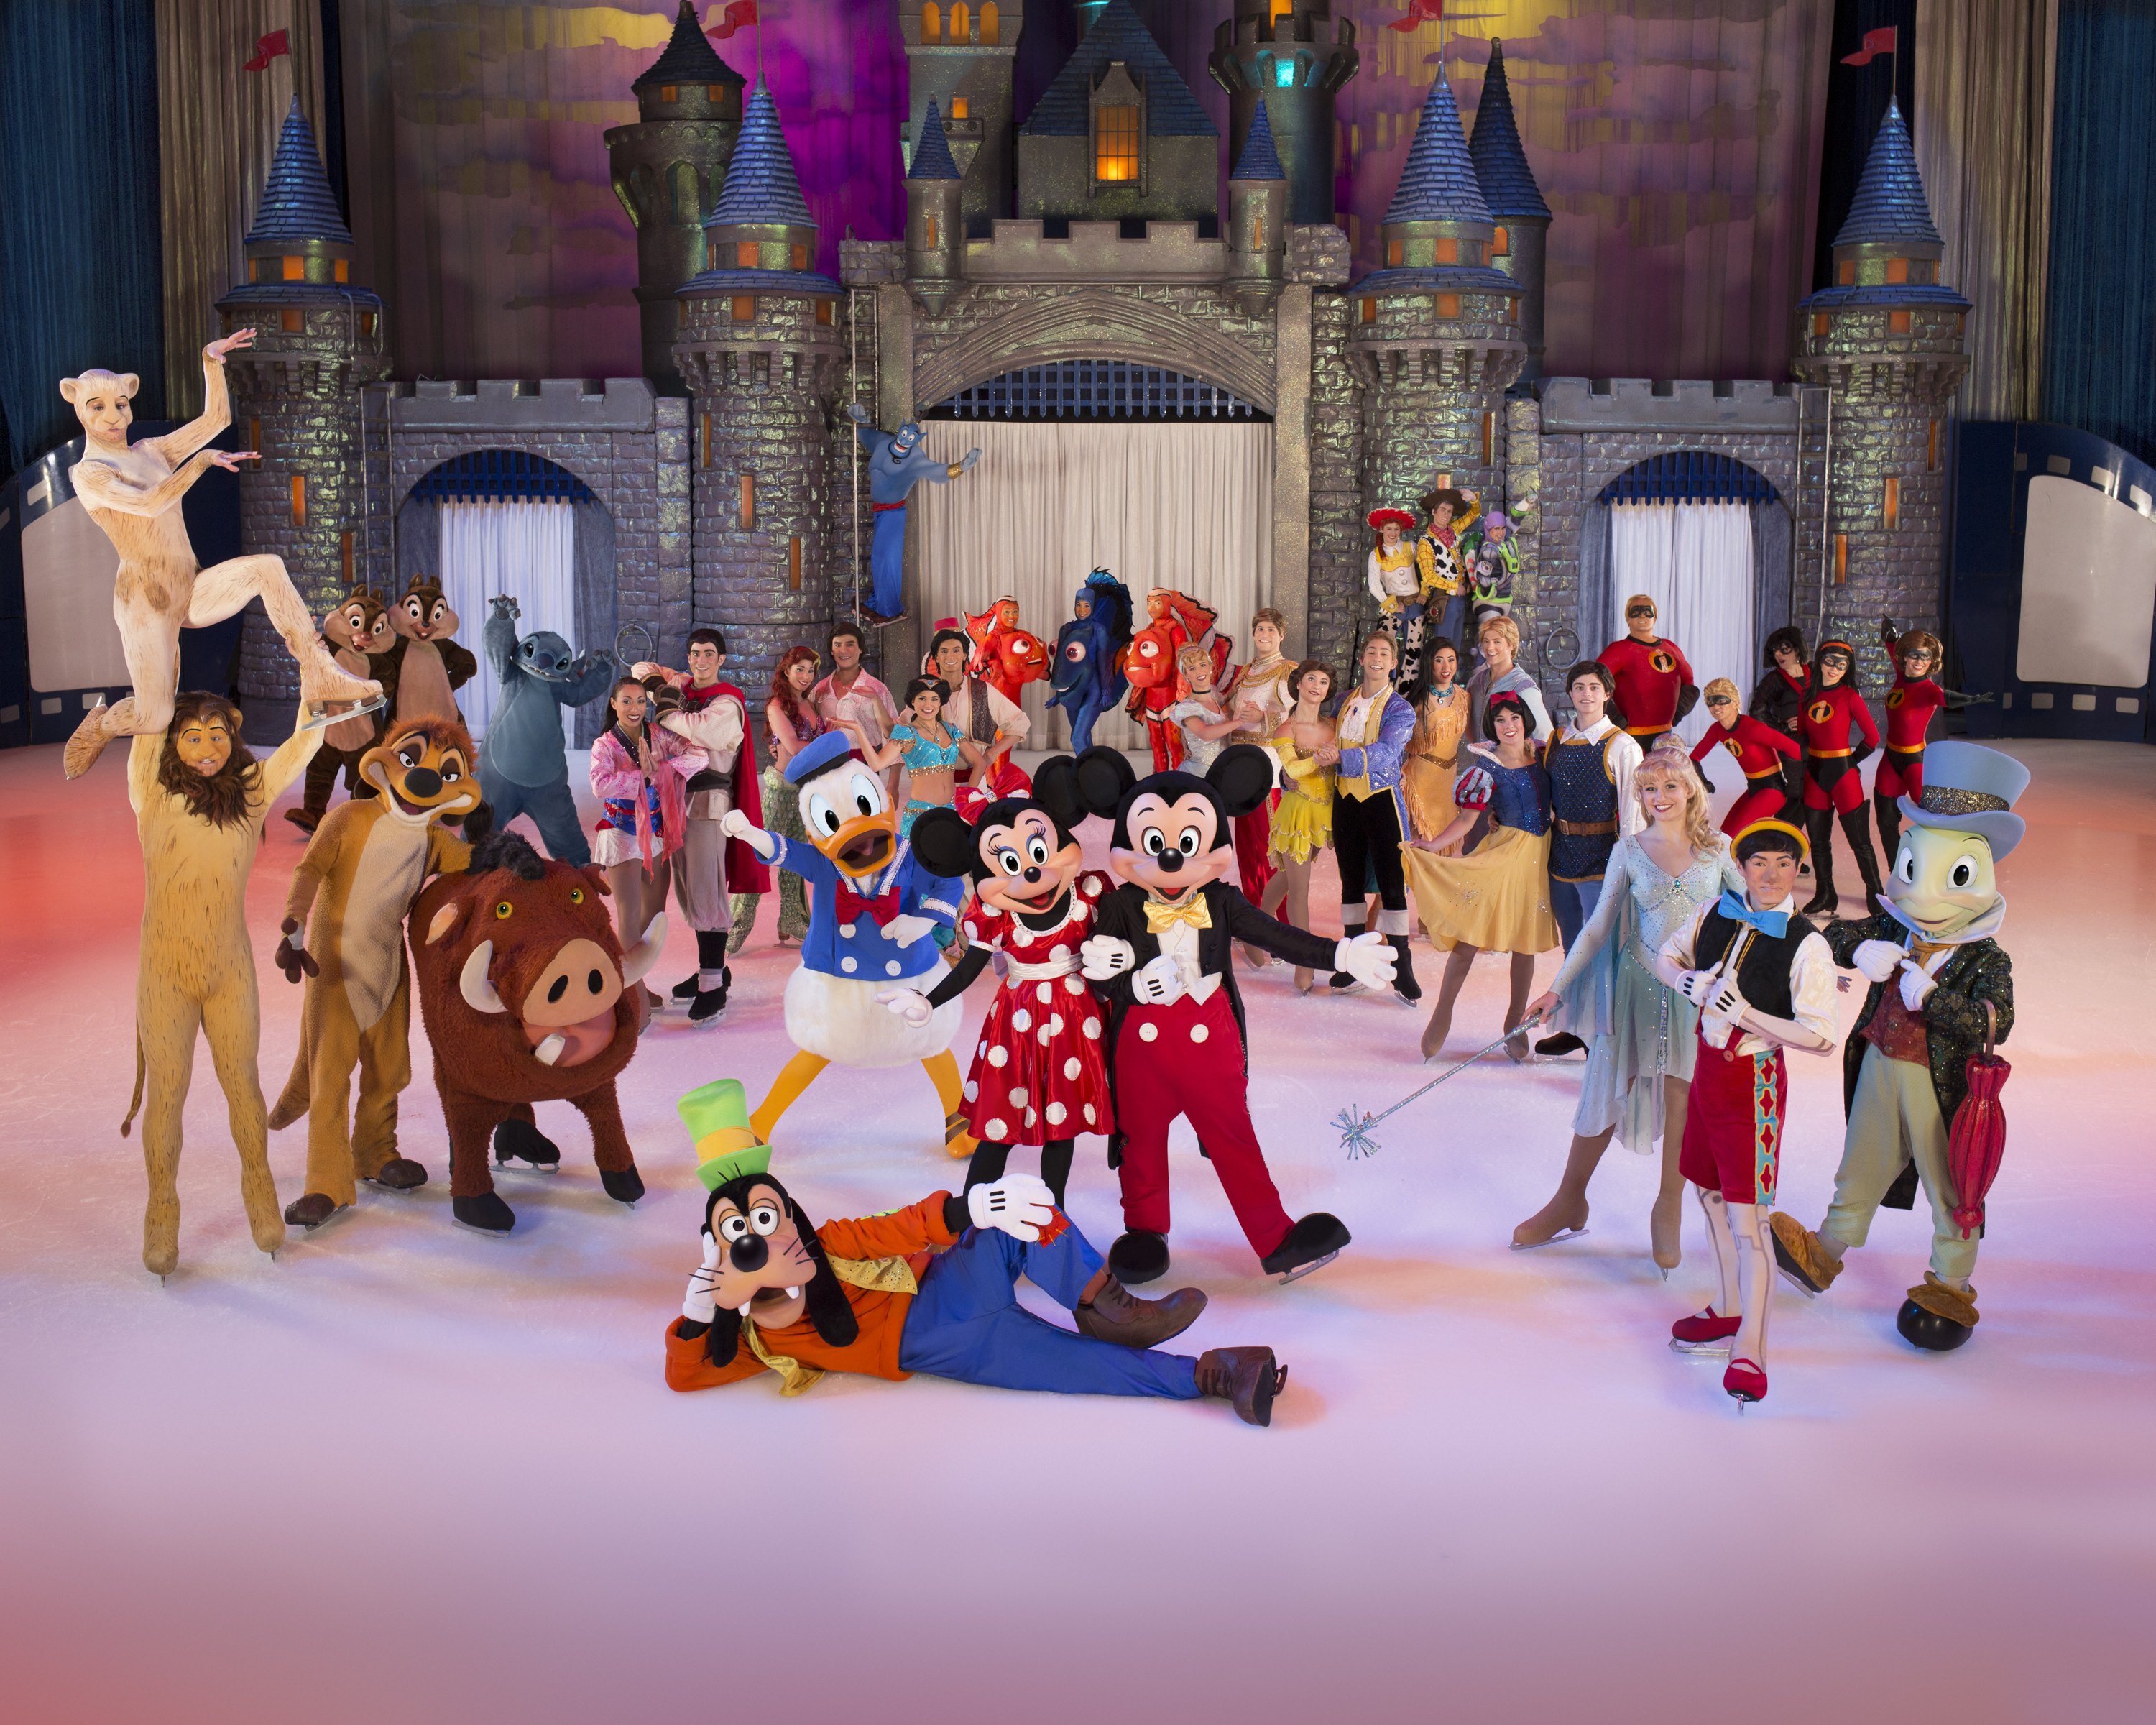 DISNEY ON ICE CELEBRATES 100 YEARS OF MAGIC IS COMING TO THE UK!